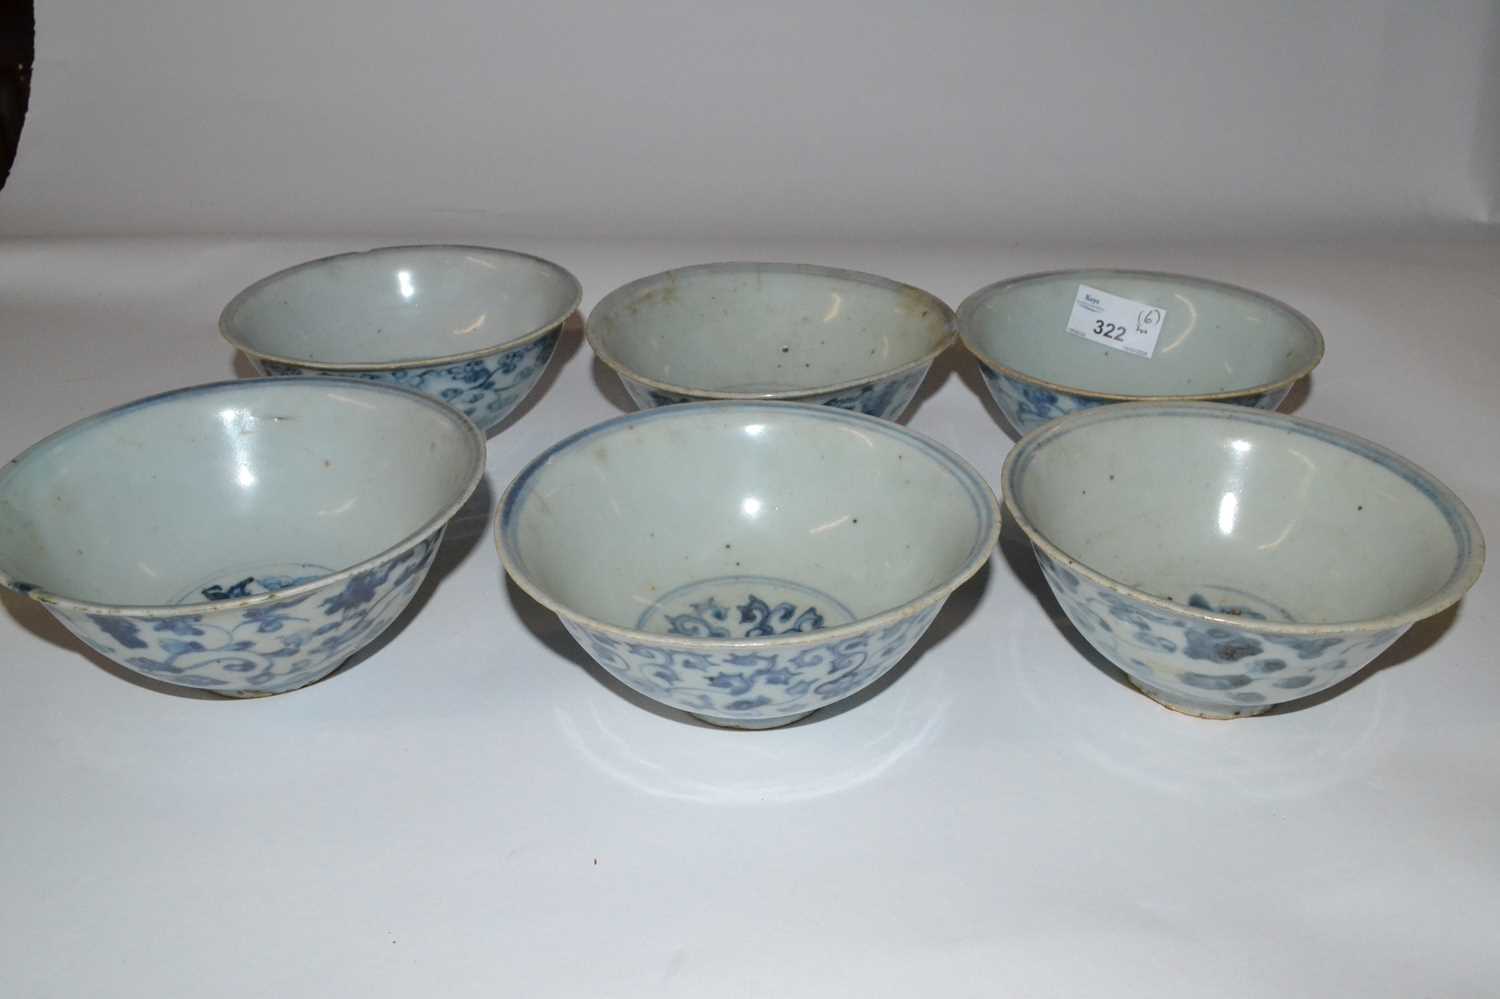 A group of six Chinese porcelain bowls with Ming Dynasty type designs, 14cm diameter (Inventory